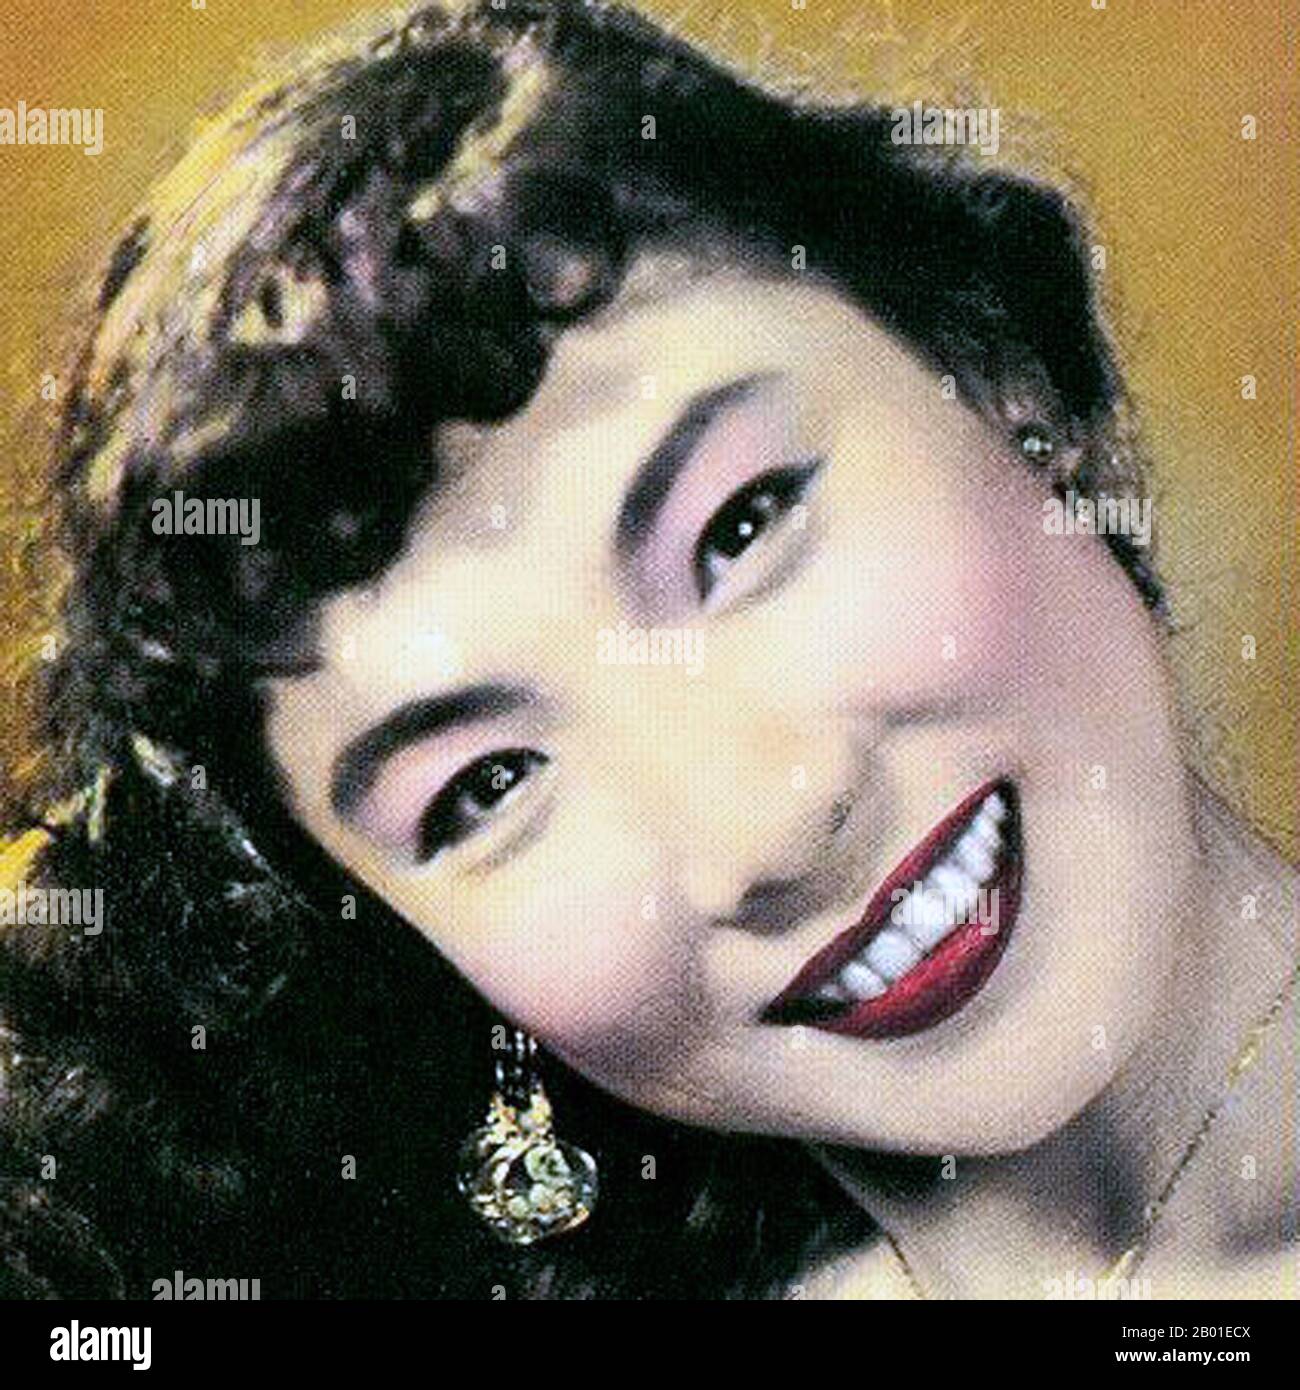 China: Wu Yingyin, (吳鶯音, 1922 - 17 December 2009), Chinese singer, c. 1940s.  Wu Yingyin, birth name Wu Jianqiu, was born to an intellectual family with her father a chemical engineer and mother a doctor. She enjoyed singing to radio tunes at an early age. She originally wanted to go to the Shanghai Academy of Music, but her parents opposed the idea and claimed that the music industry was for individuals with no real ambition. She later began singing for radio stations at night, particularly for the children's programs.  By the 1940s, she became one of China's 'seven great singing stars'. Stock Photo